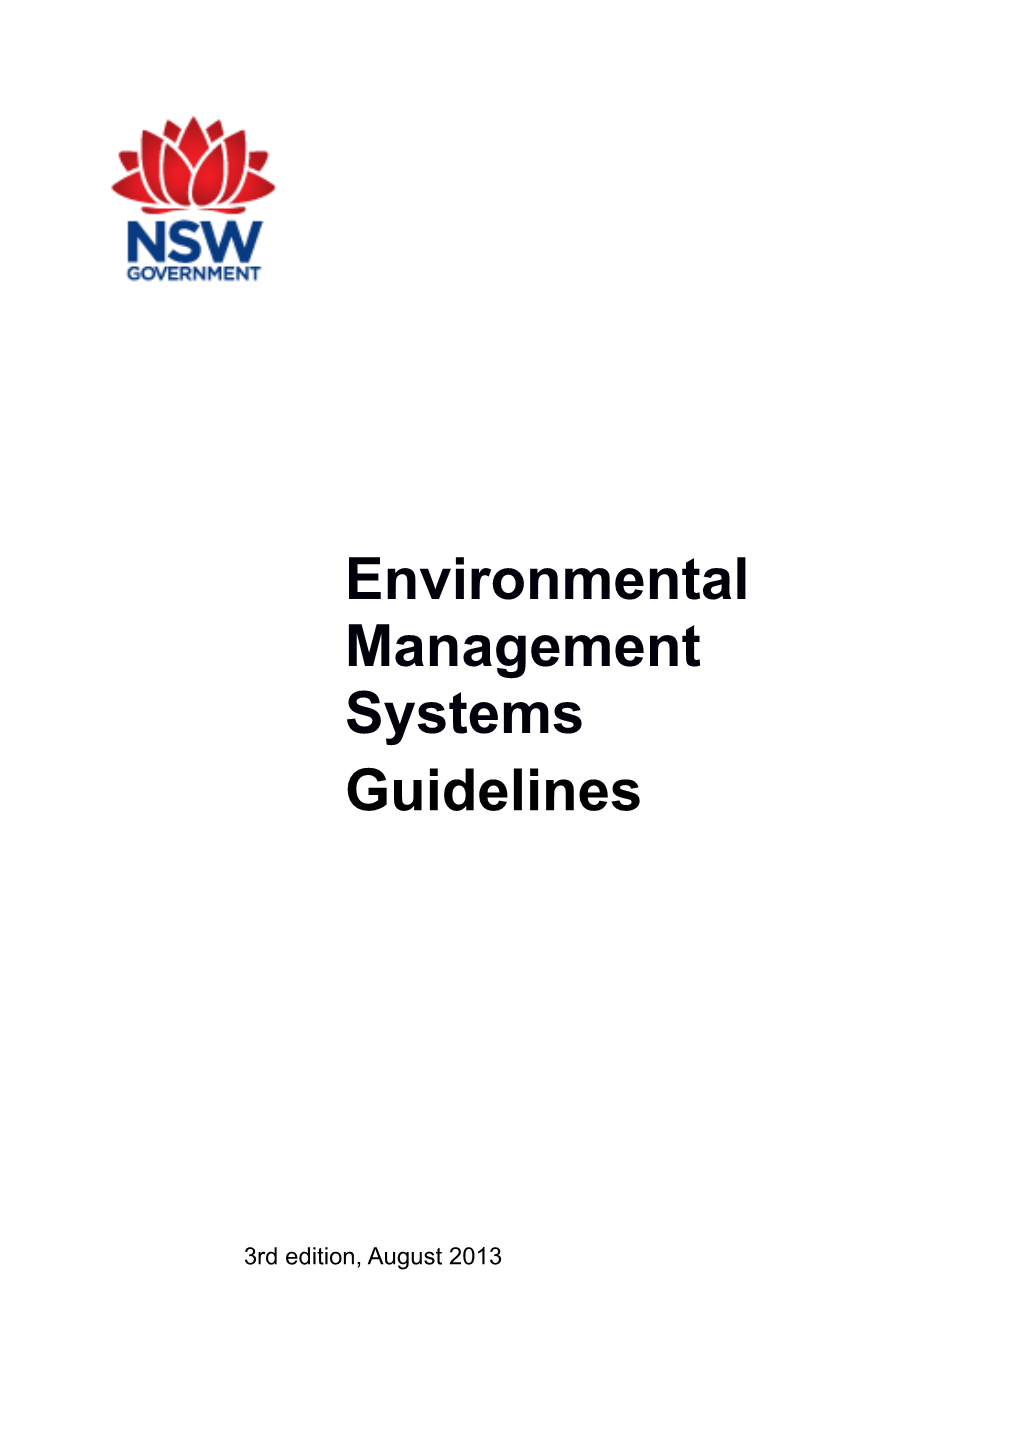 Environmental Management System Guidelines